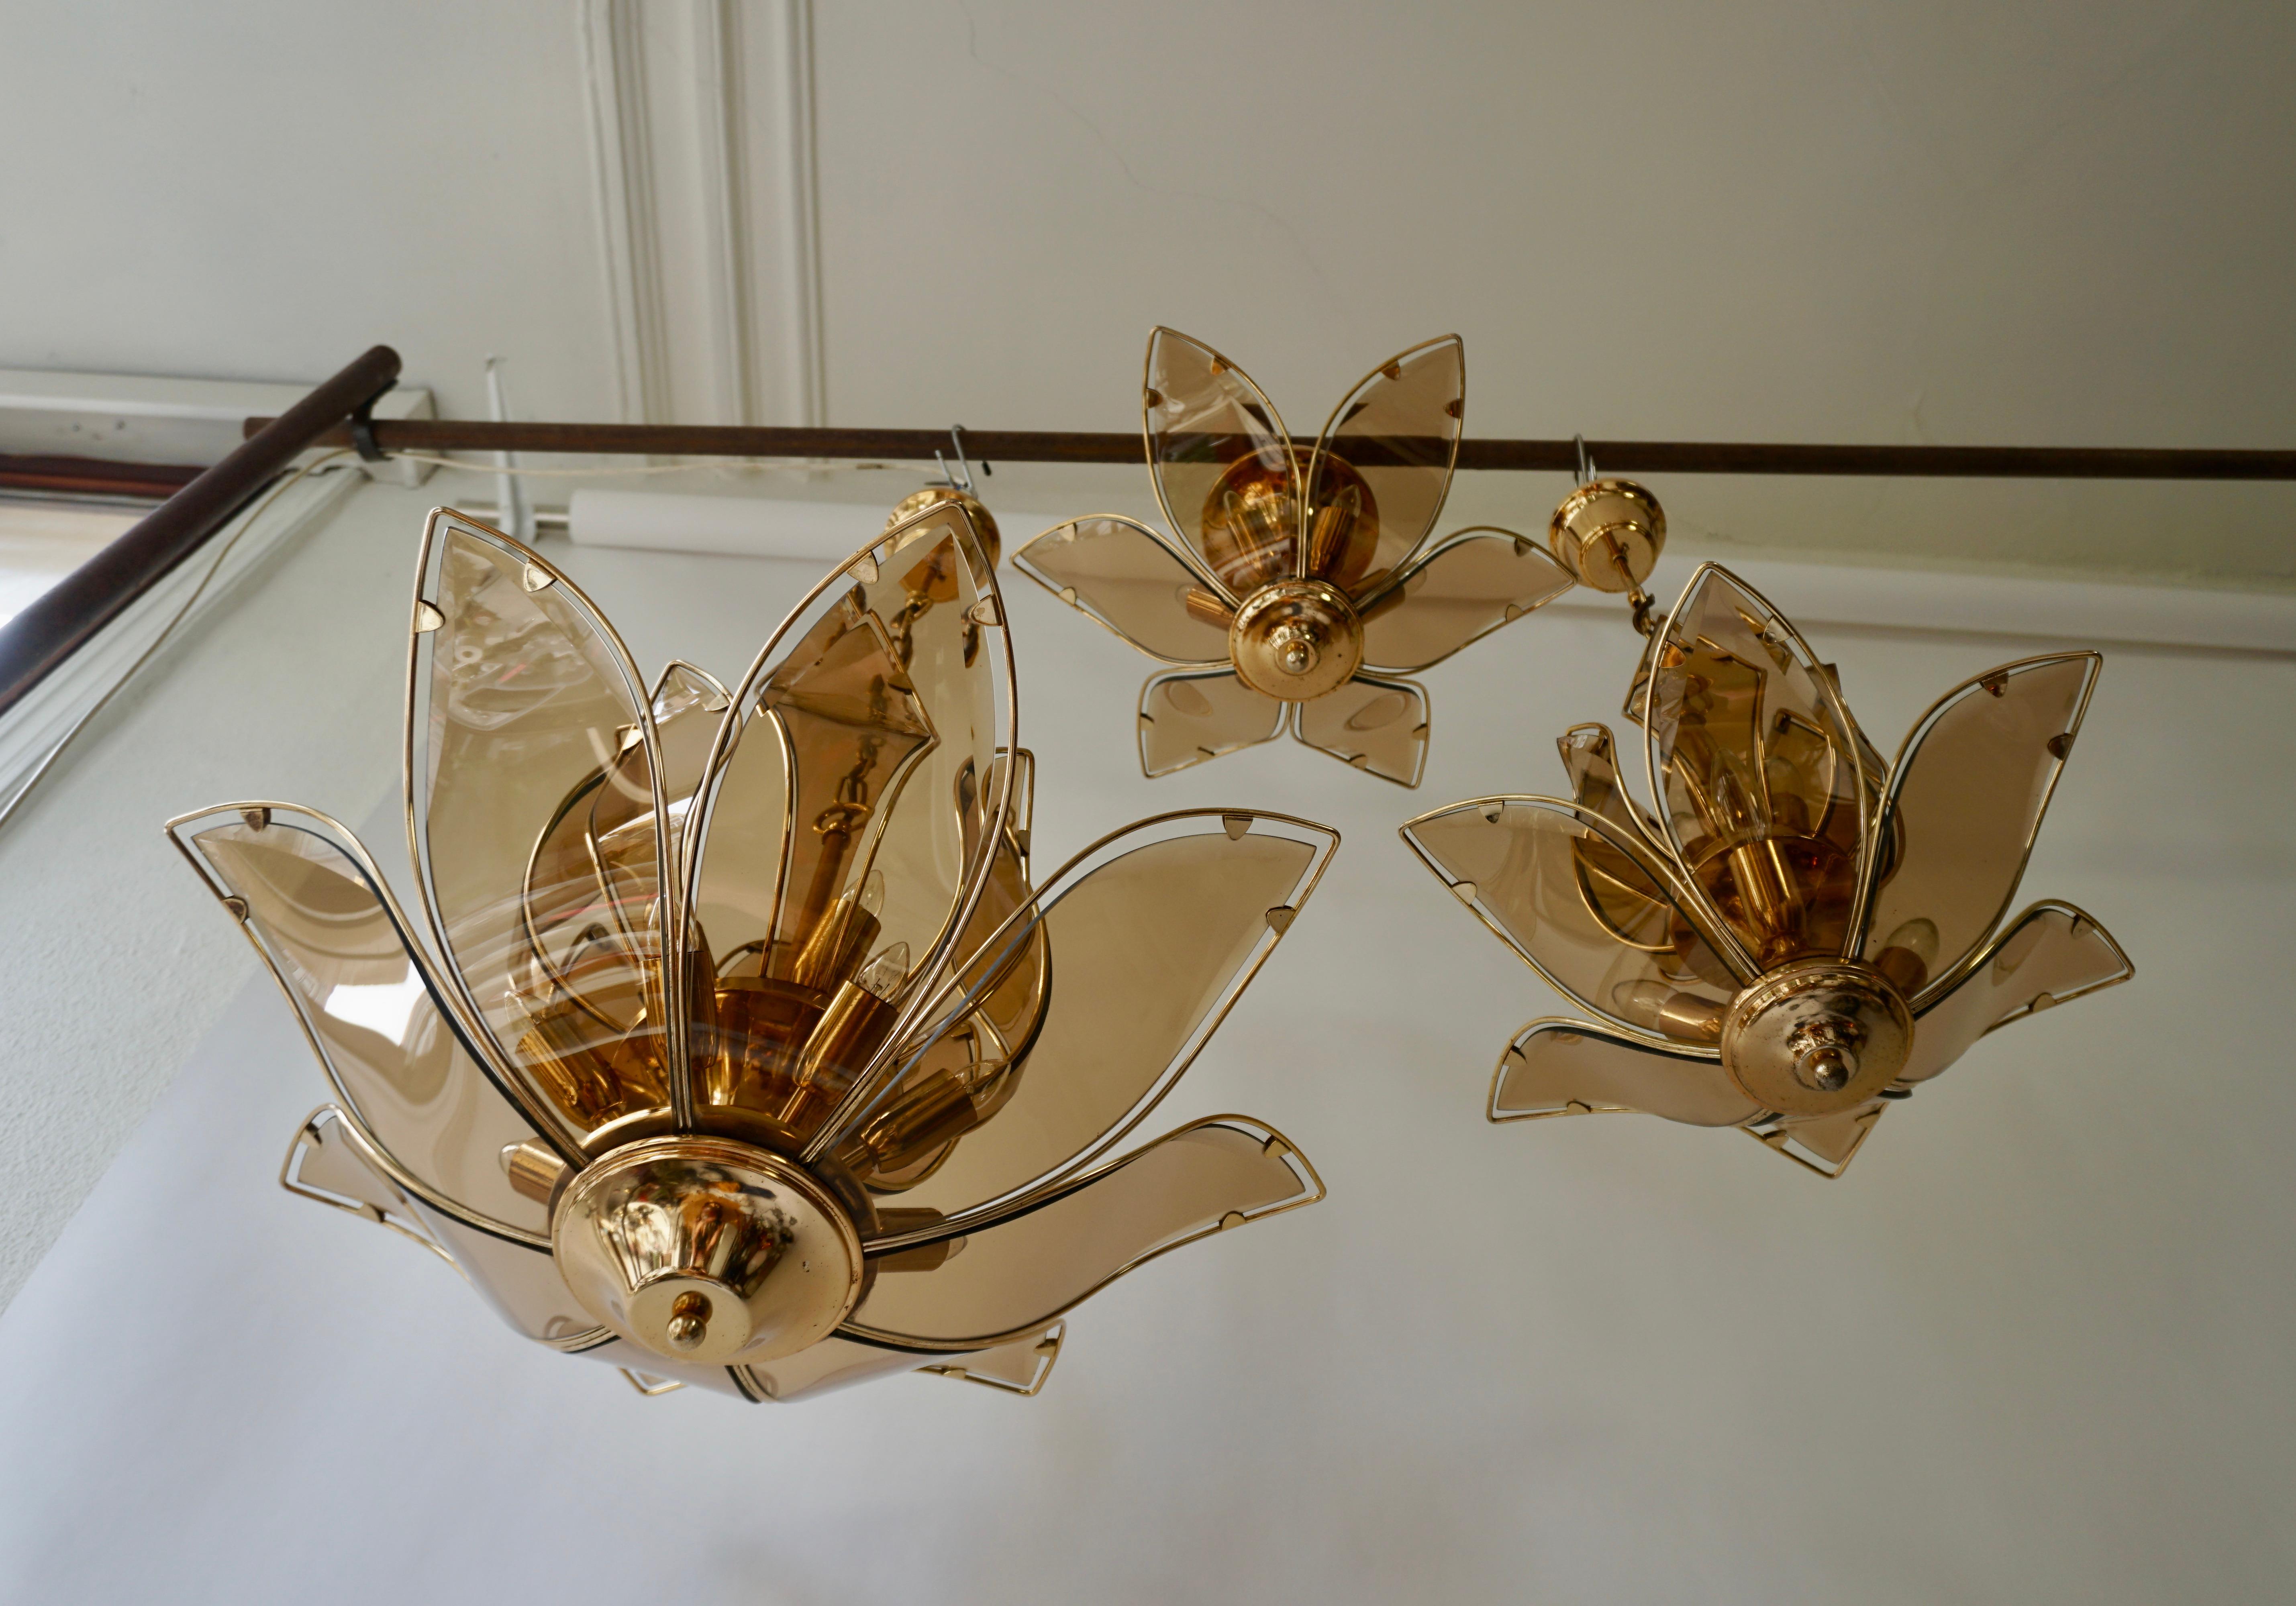 Two chandeliers and one flush mount in brass and glass. Italy 1970s.
Dimensions;
Chandelier: Diameter 64 cm, height fixture 50 cm, total height 85 cm. Twelve E14 bulbs.
Chandelier: Diameter 48 cm, height fixture 44 cm, total height 73 cm. Six E14